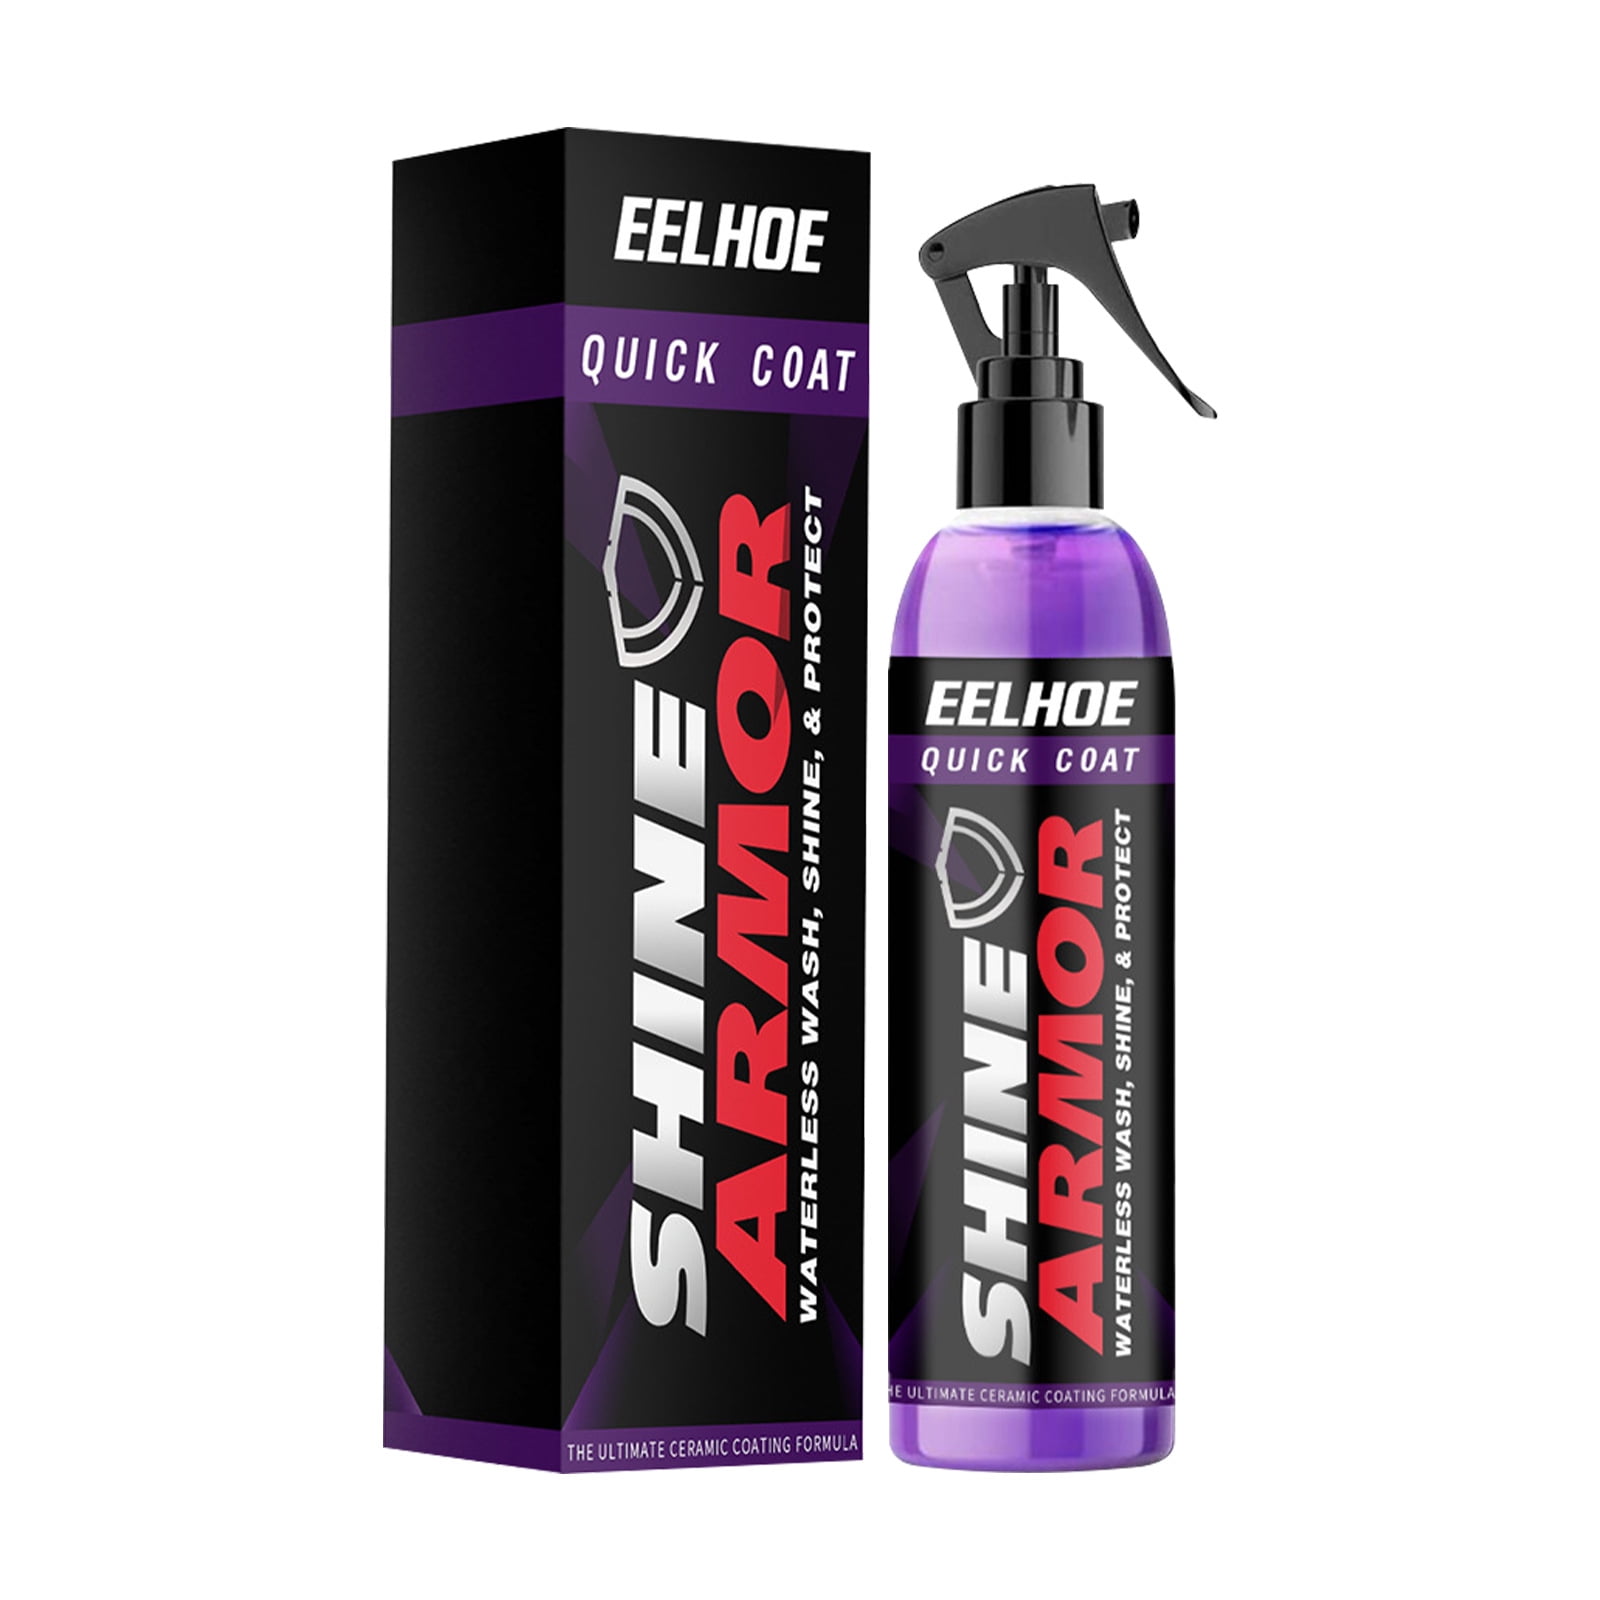 SHINE ARMOR Fortify Quick Coat & Pristine Tire Shine Gel Dressing & Cleaner